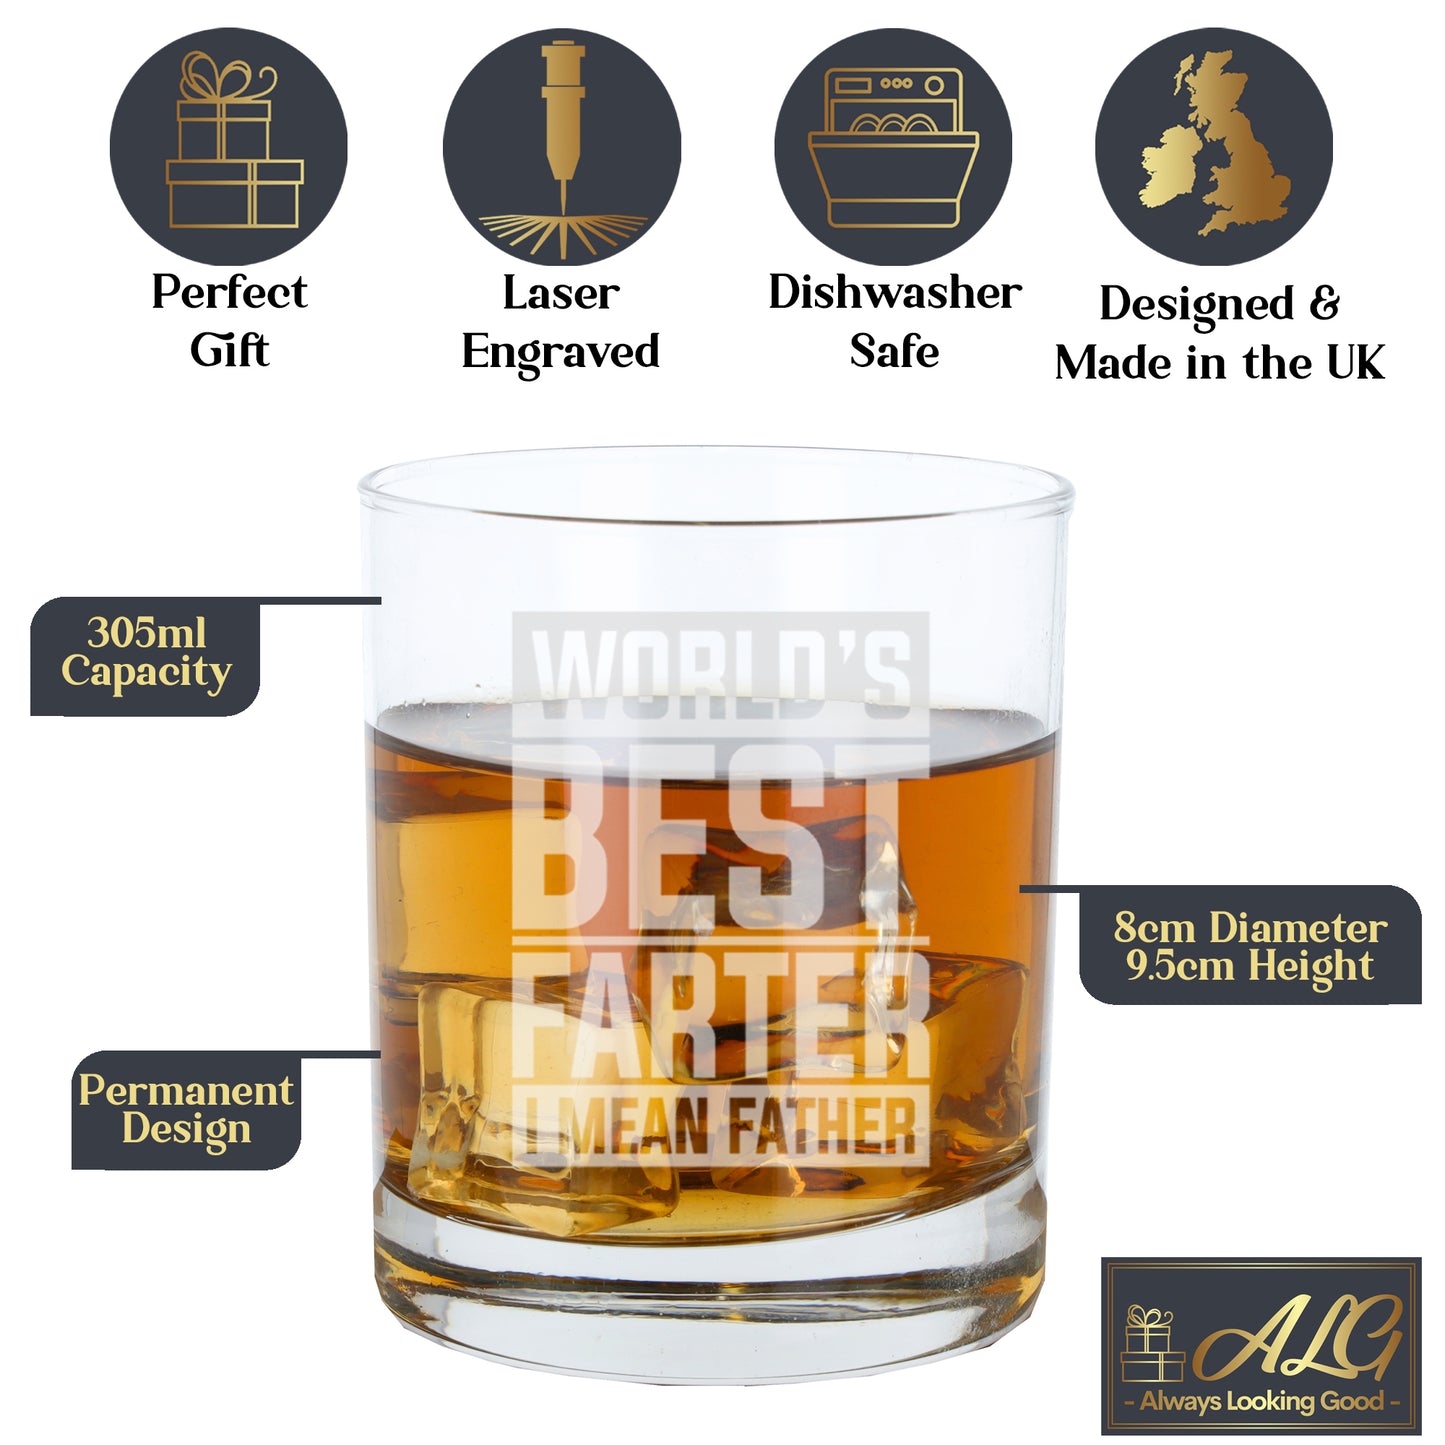 "Worlds Best Farter I Mean Father" Novelty Engraved Whisky Glass and/or Coaster Set  - Always Looking Good -   